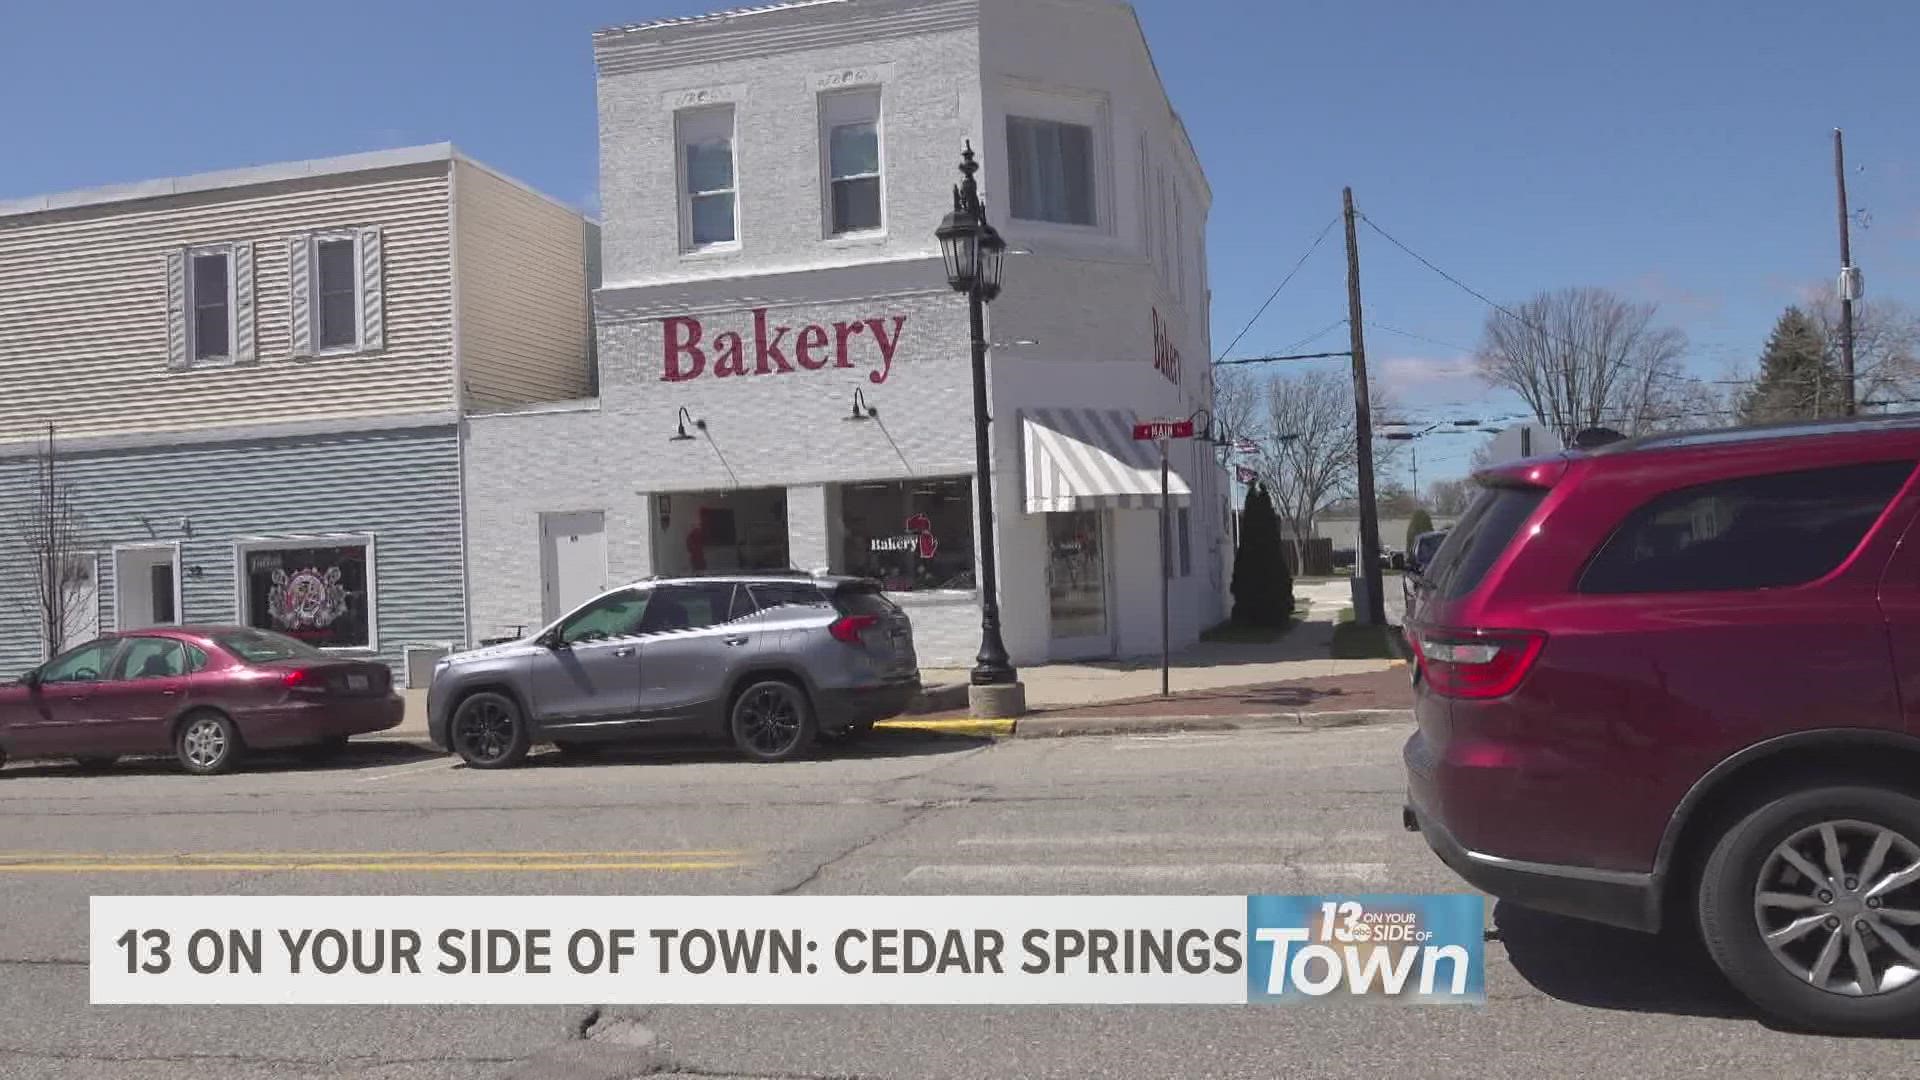 Busy Mom's Bakery was opened just a week before the state was shut down due to the pandemic—but two years later, they're hoping to revitalize Cedar Springs.